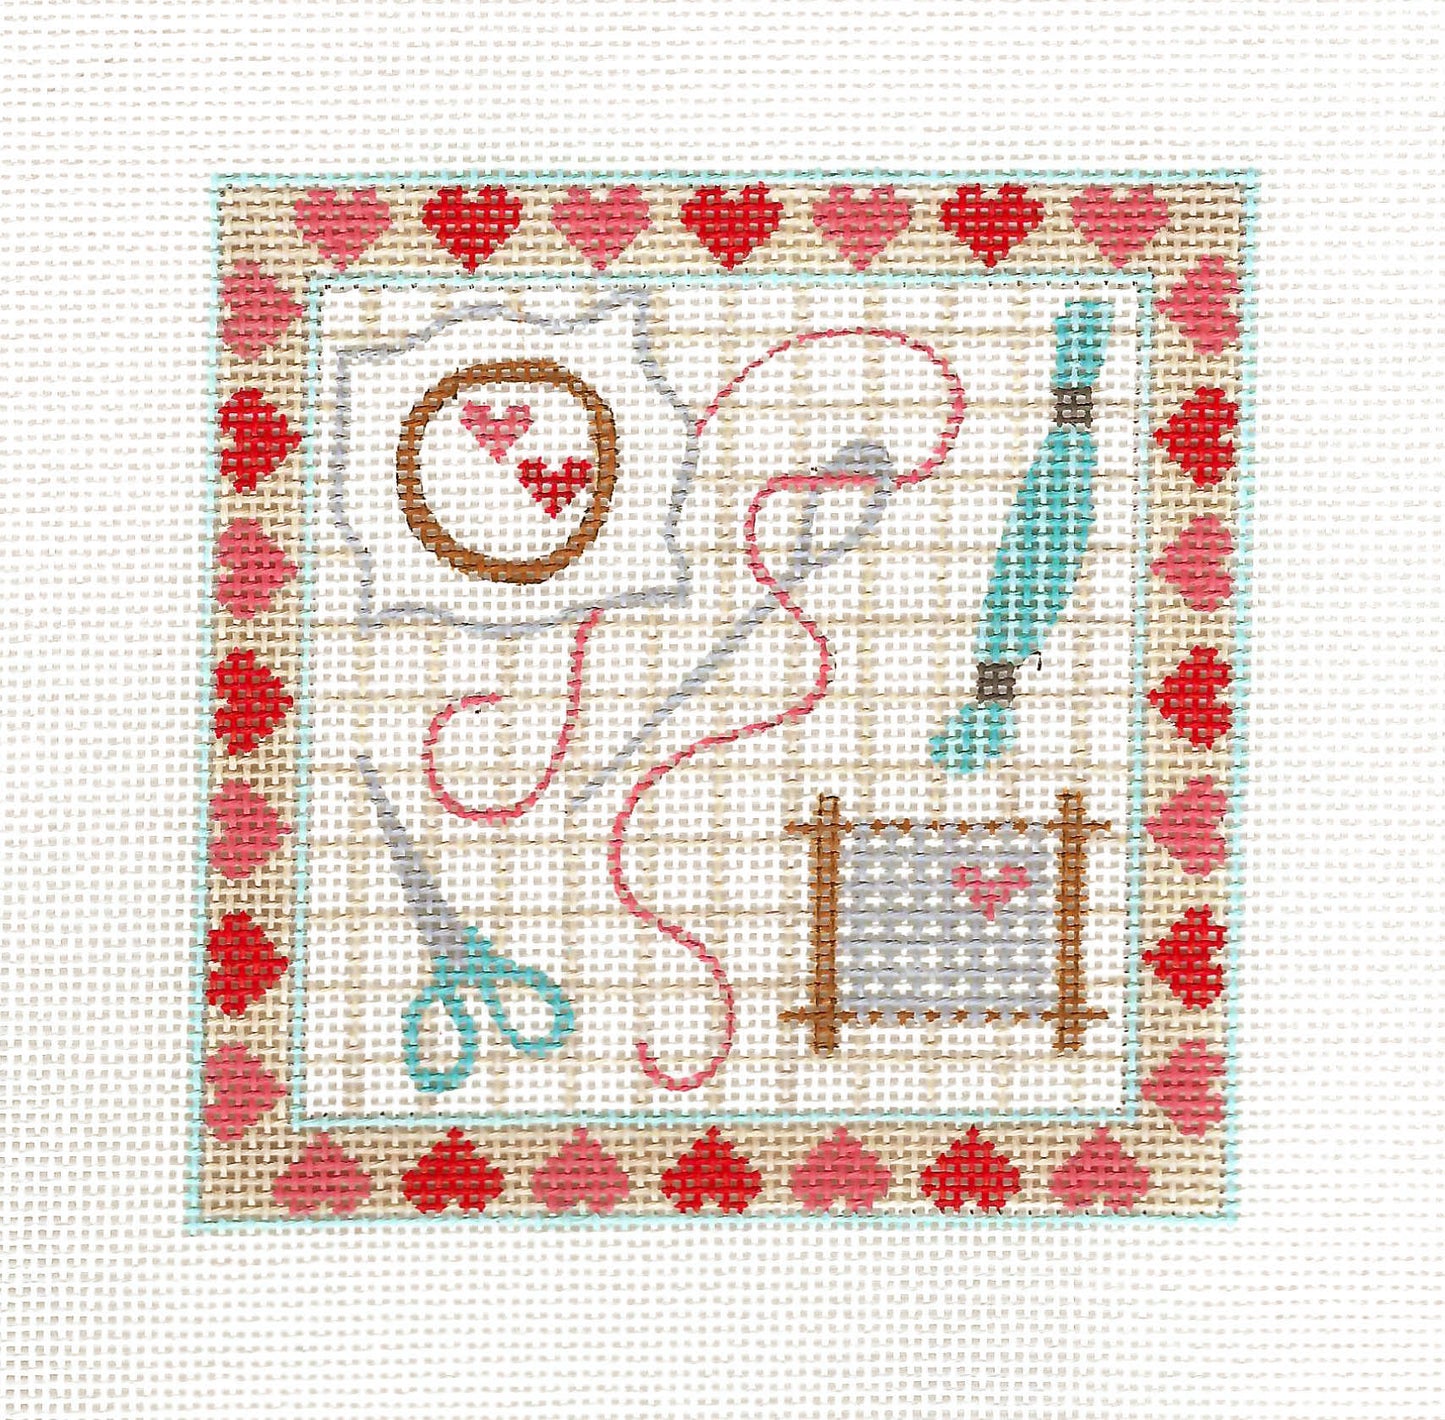 Stitchers 4" Square  Coaster handpainted 18 mesh Needlepoint Canvas by CH Designs from Danji